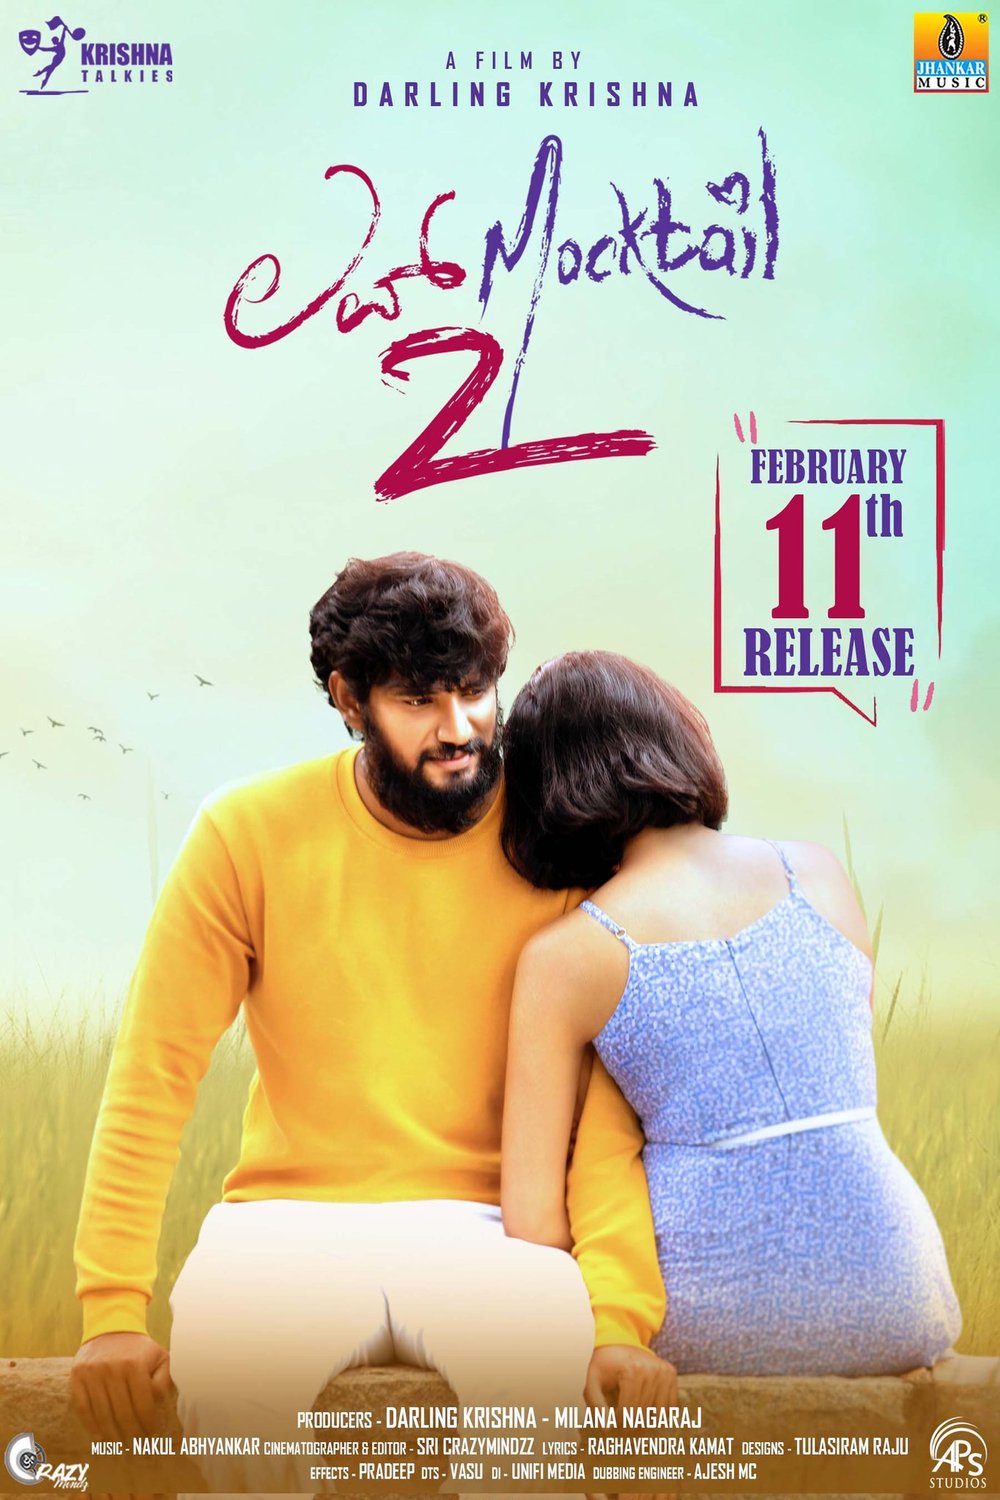 Kannada poster of the movie Love Mocktail 2